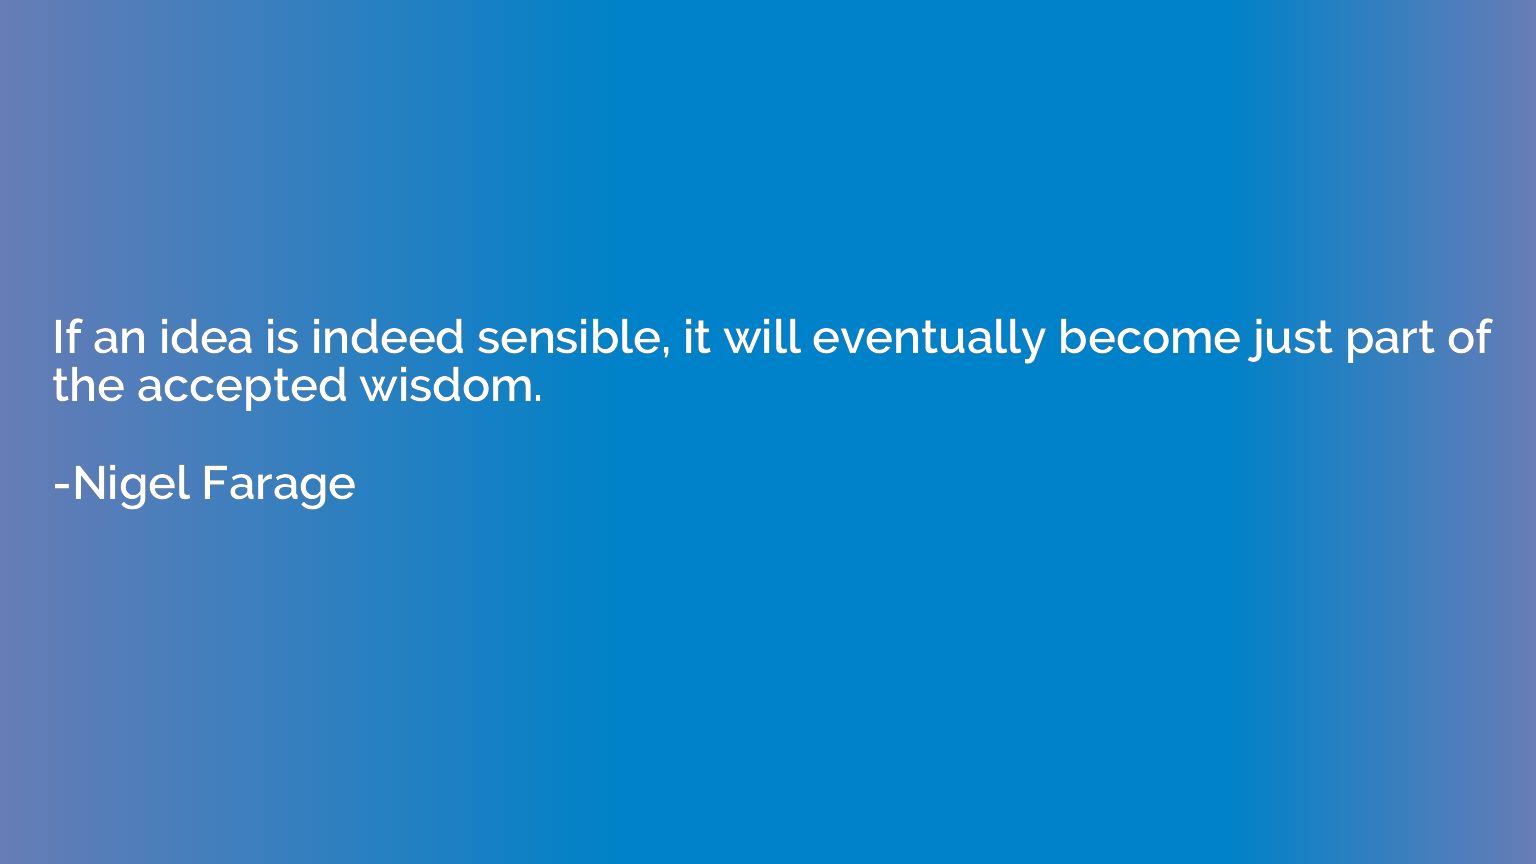 If an idea is indeed sensible, it will eventually become jus